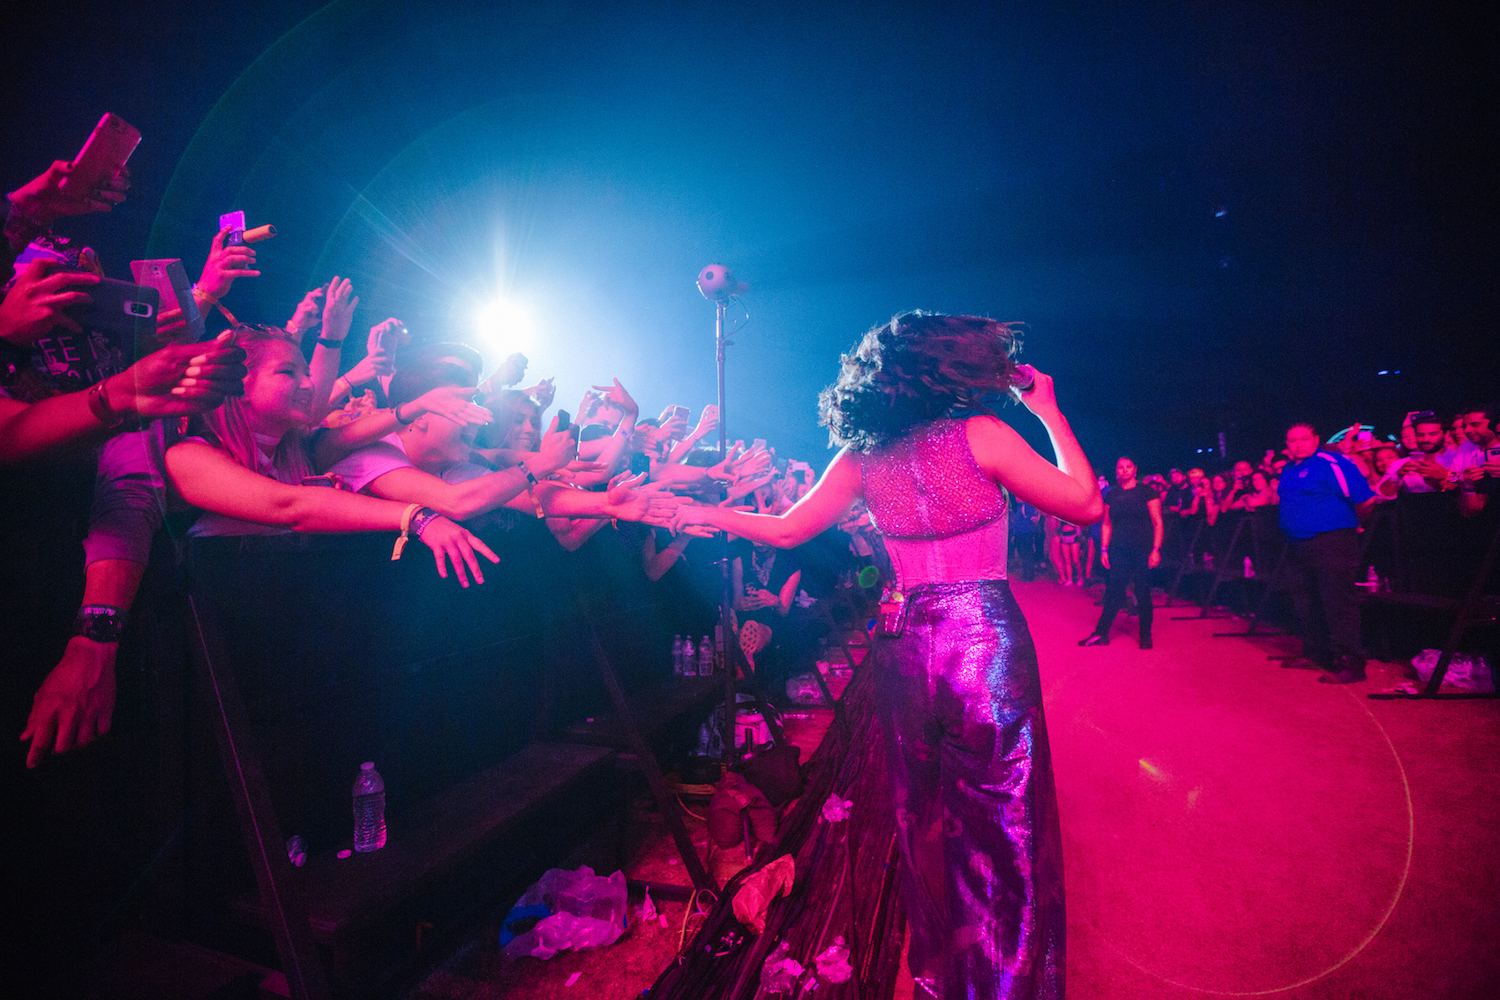 Lorde in concert, photographed from behind near the barrier, running her hand along the hundreds of hands stretched out towards her.